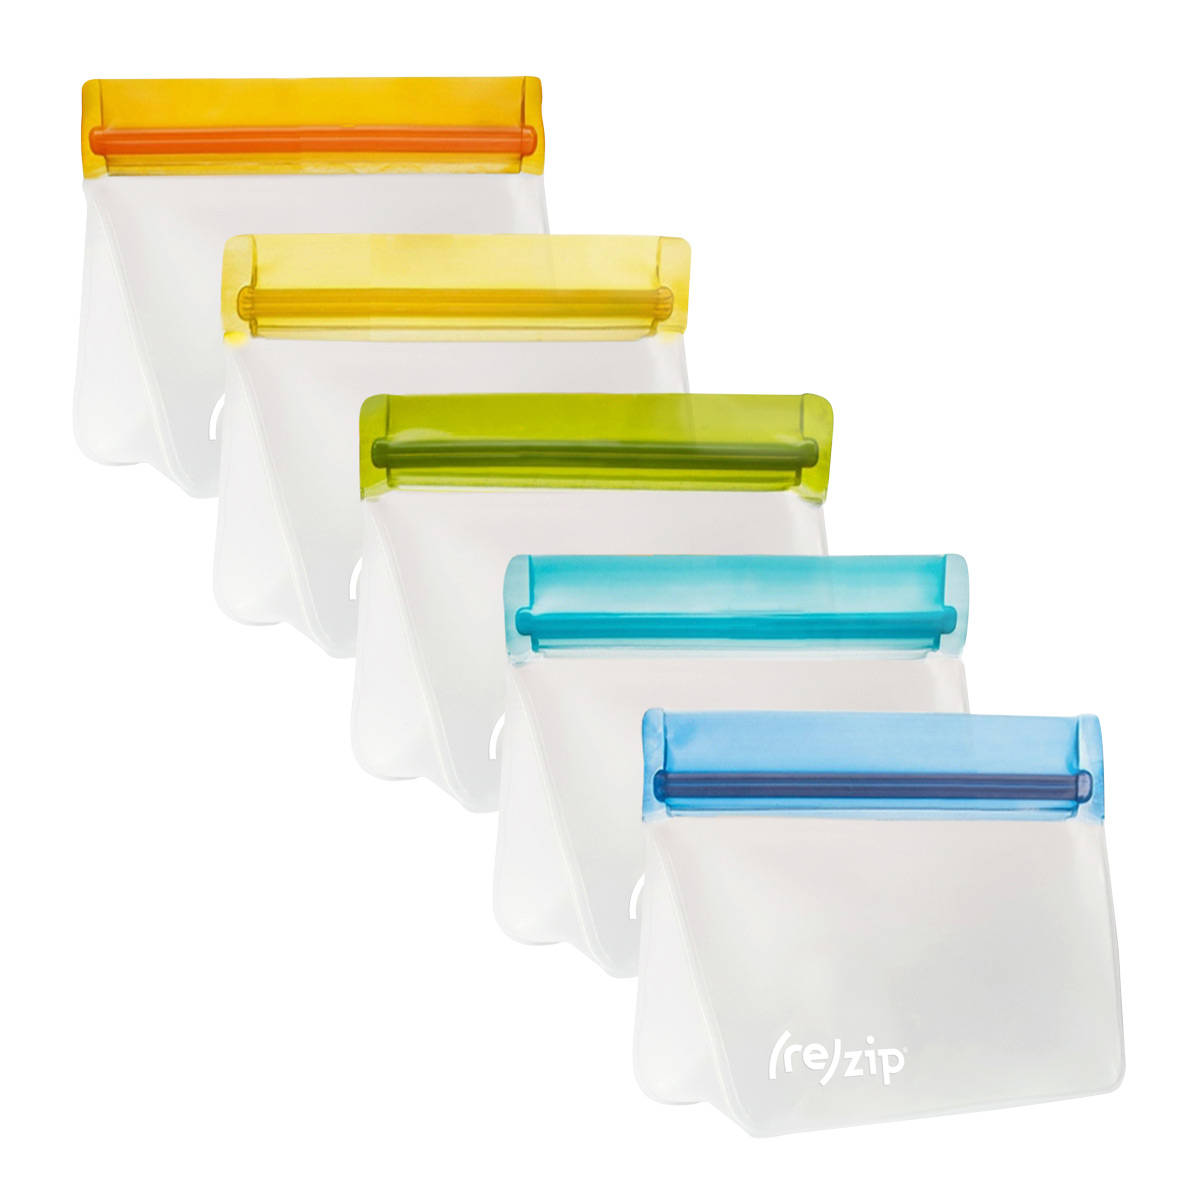 https://www.containerstore.com/catalogimages/409901/10070232-Stand-Up-1-Cup-5-Piece-Kit-.jpg